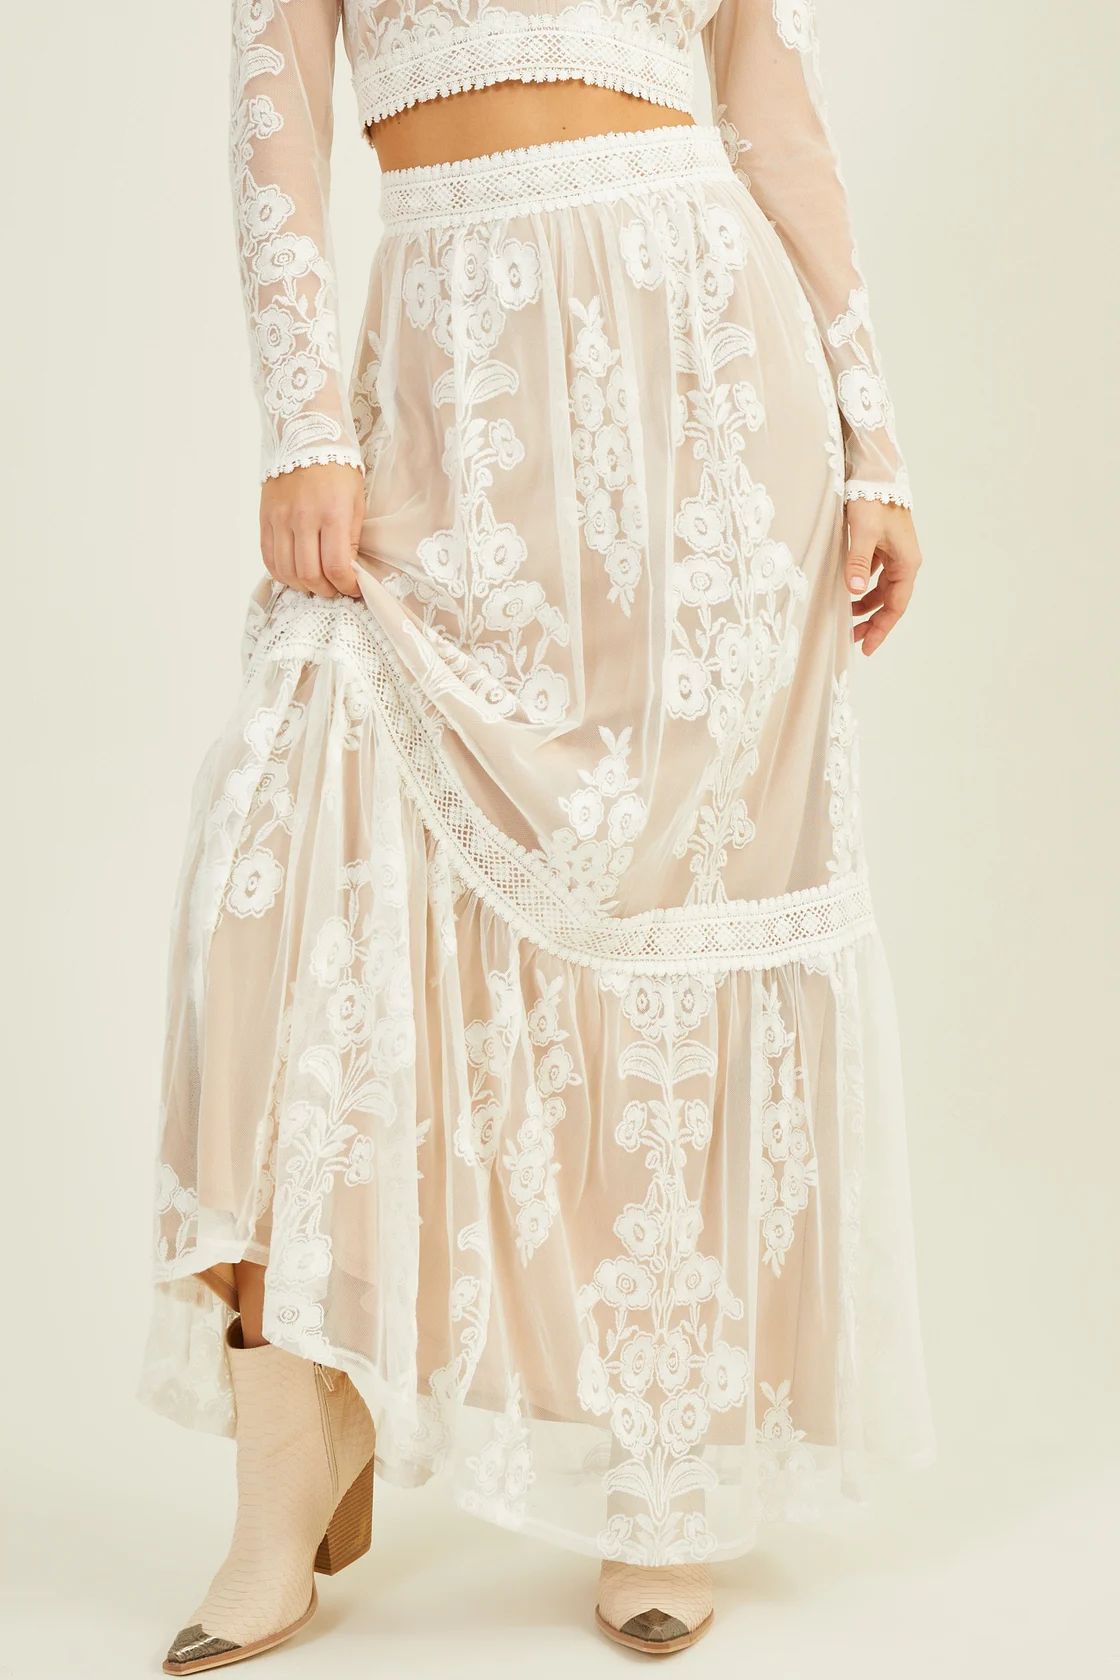 Arissa Embroidered Maxi Skirt in White | Altar'd State | Altar'd State